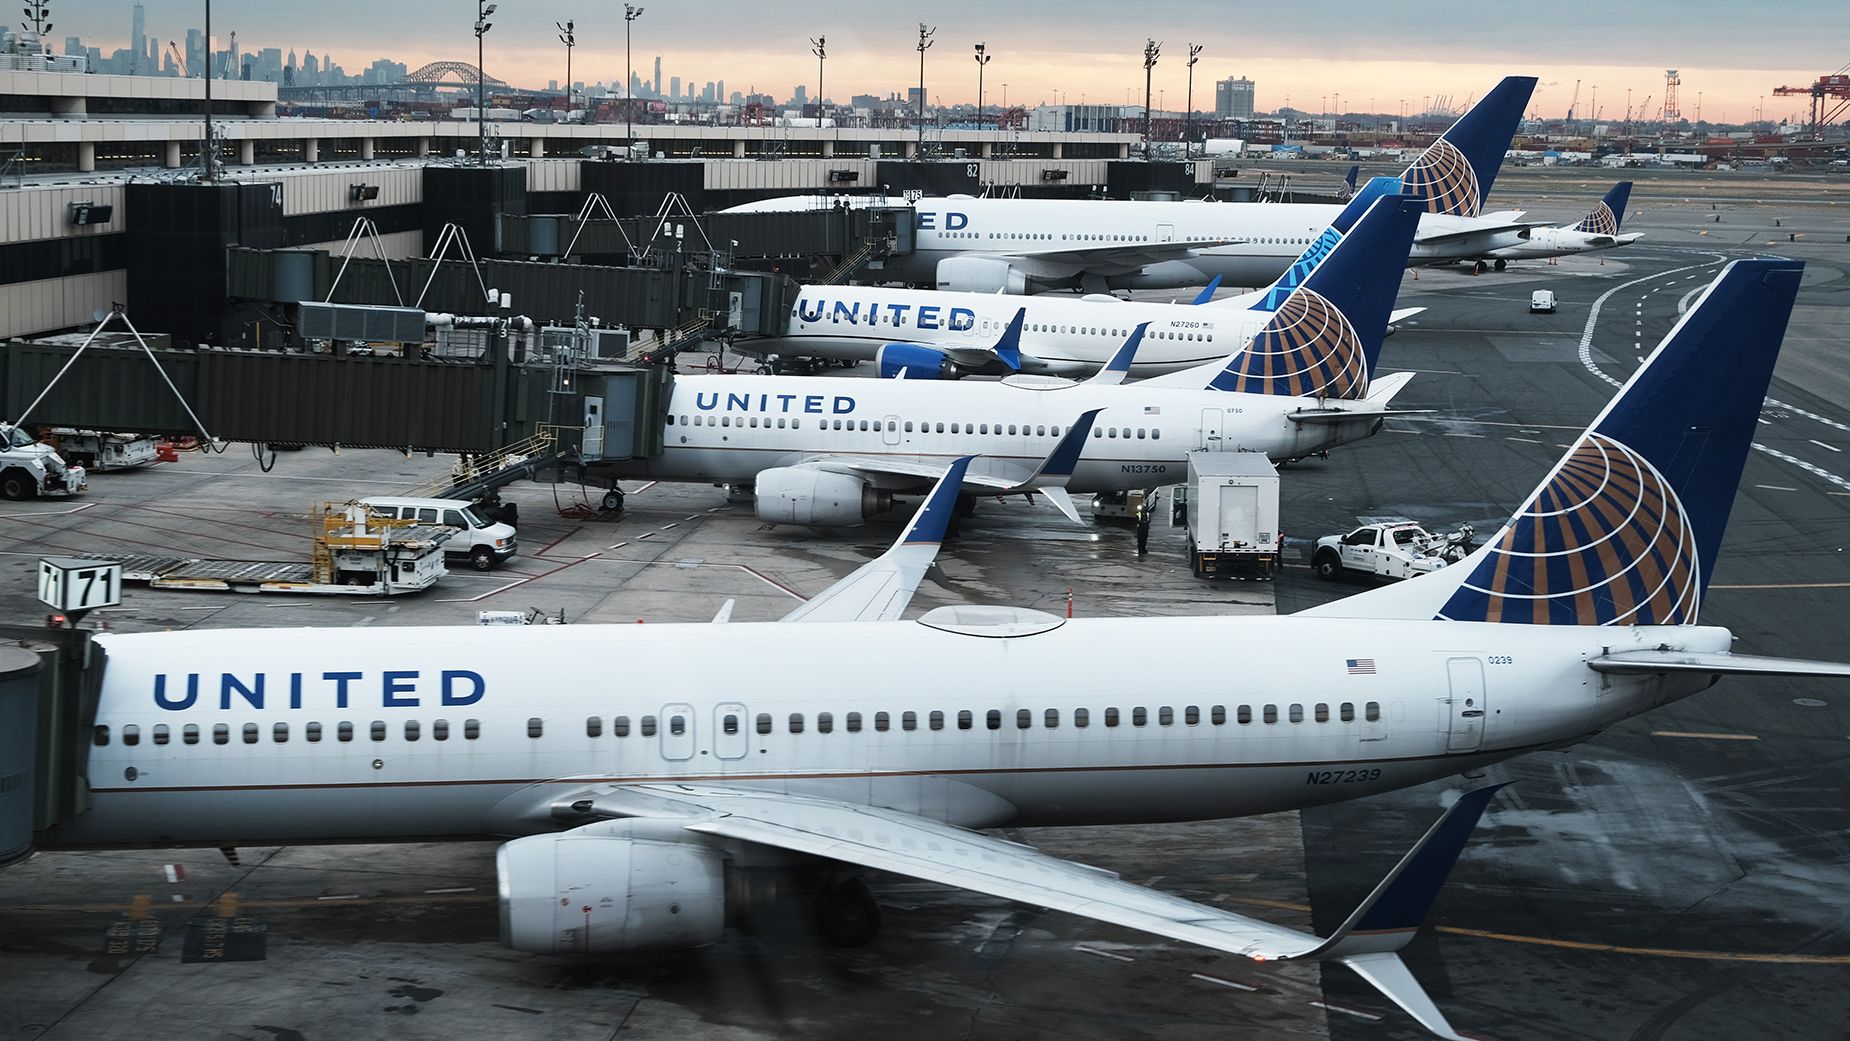 United Airlines planes sit on the runway at Newark Liberty International Airport in New Jersey. The company hopes to shave a few precious minutes in the boarding procedure and get planes in the air a little more quickly.